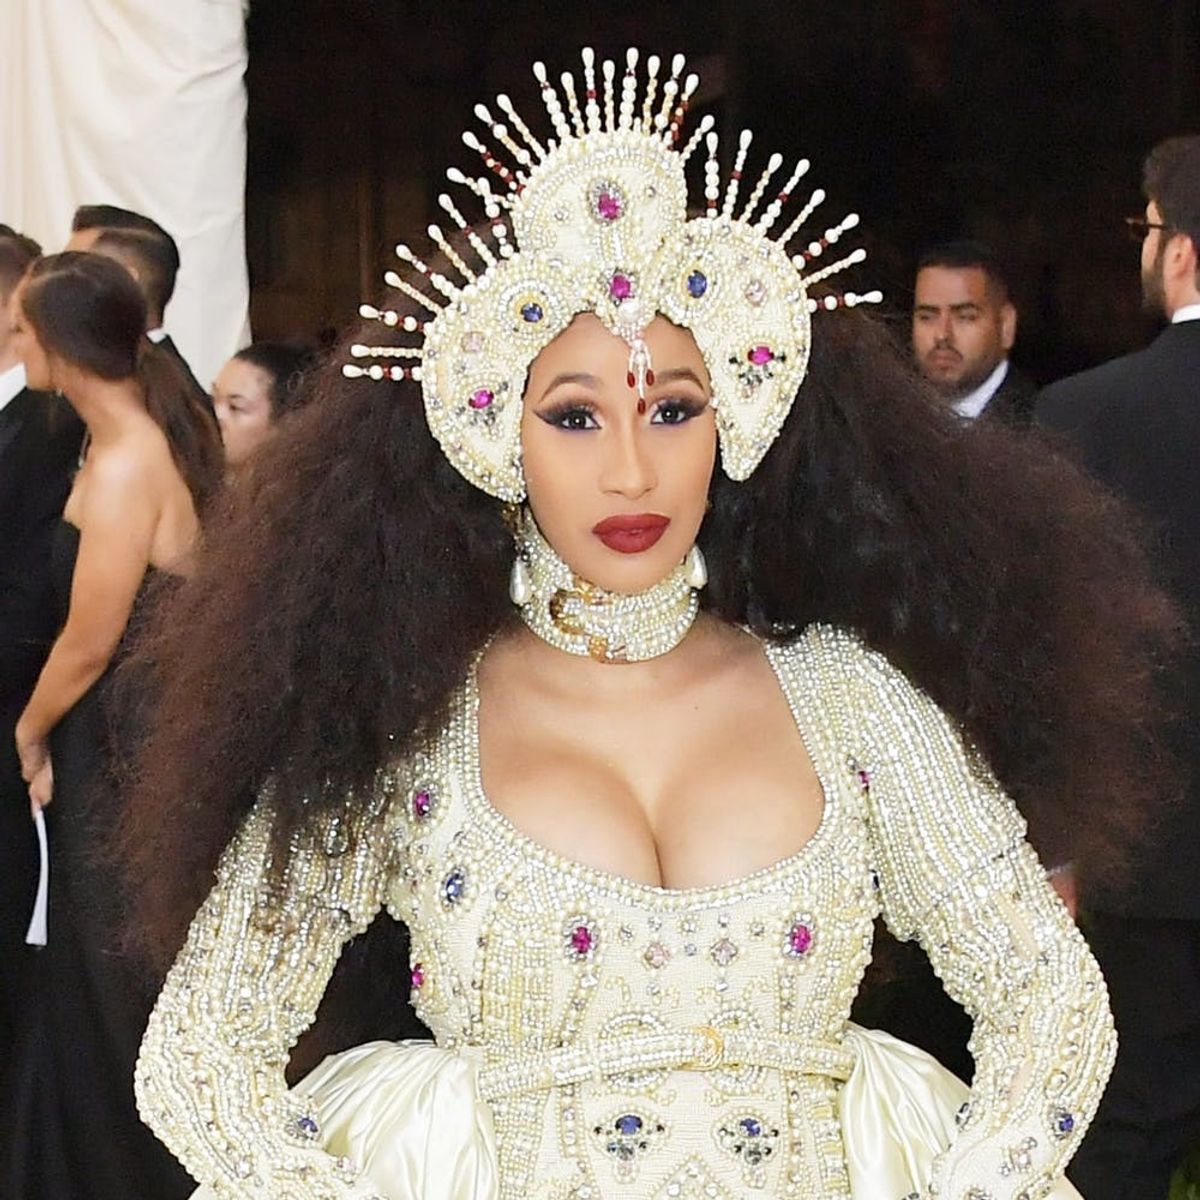 Cardi B Reveals the Sex of Her Baby